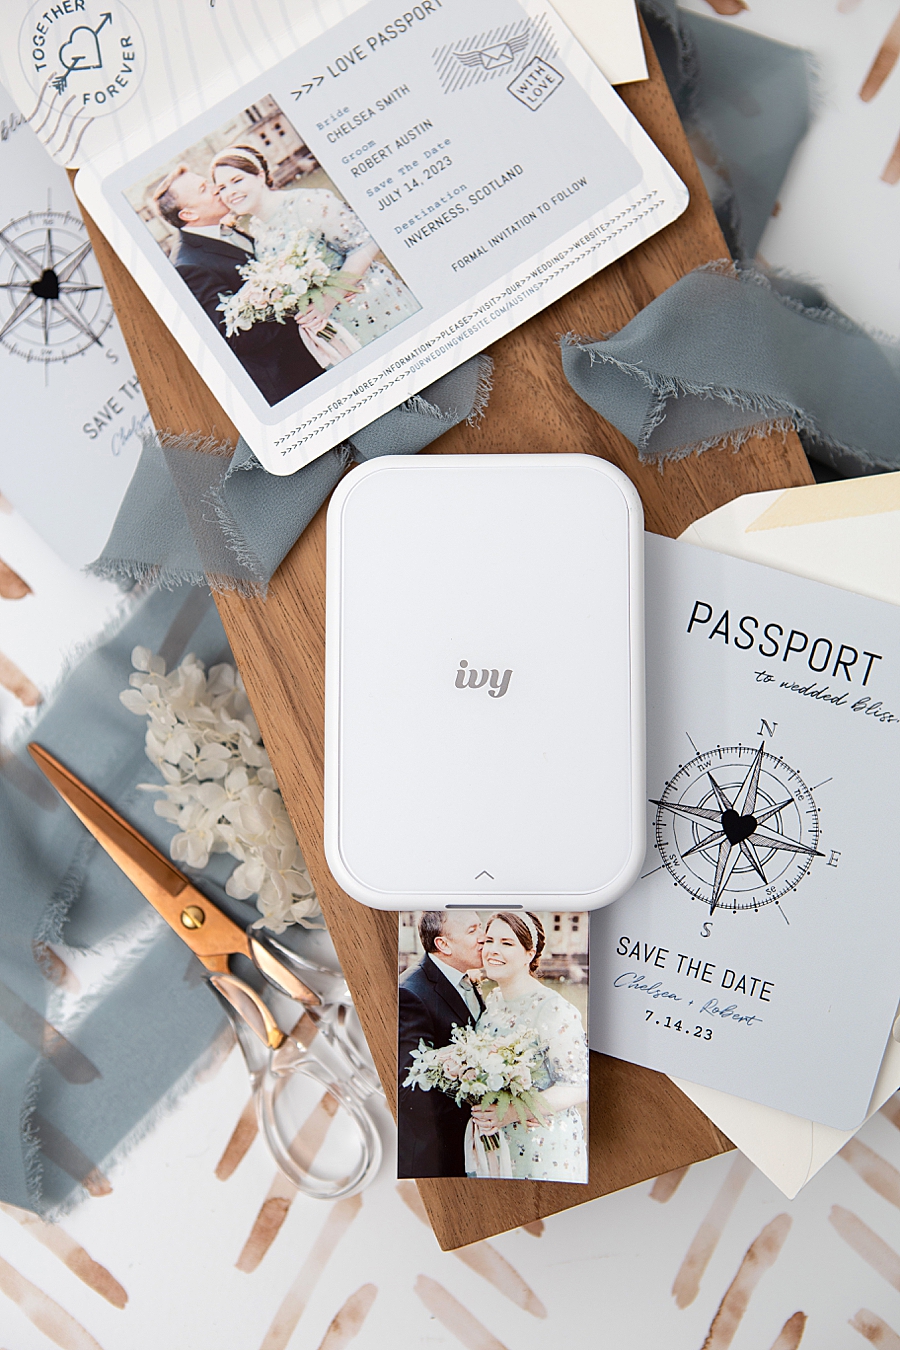 Use your Canon IVY 2 mini photo printer to make these passport style save the date invitations!